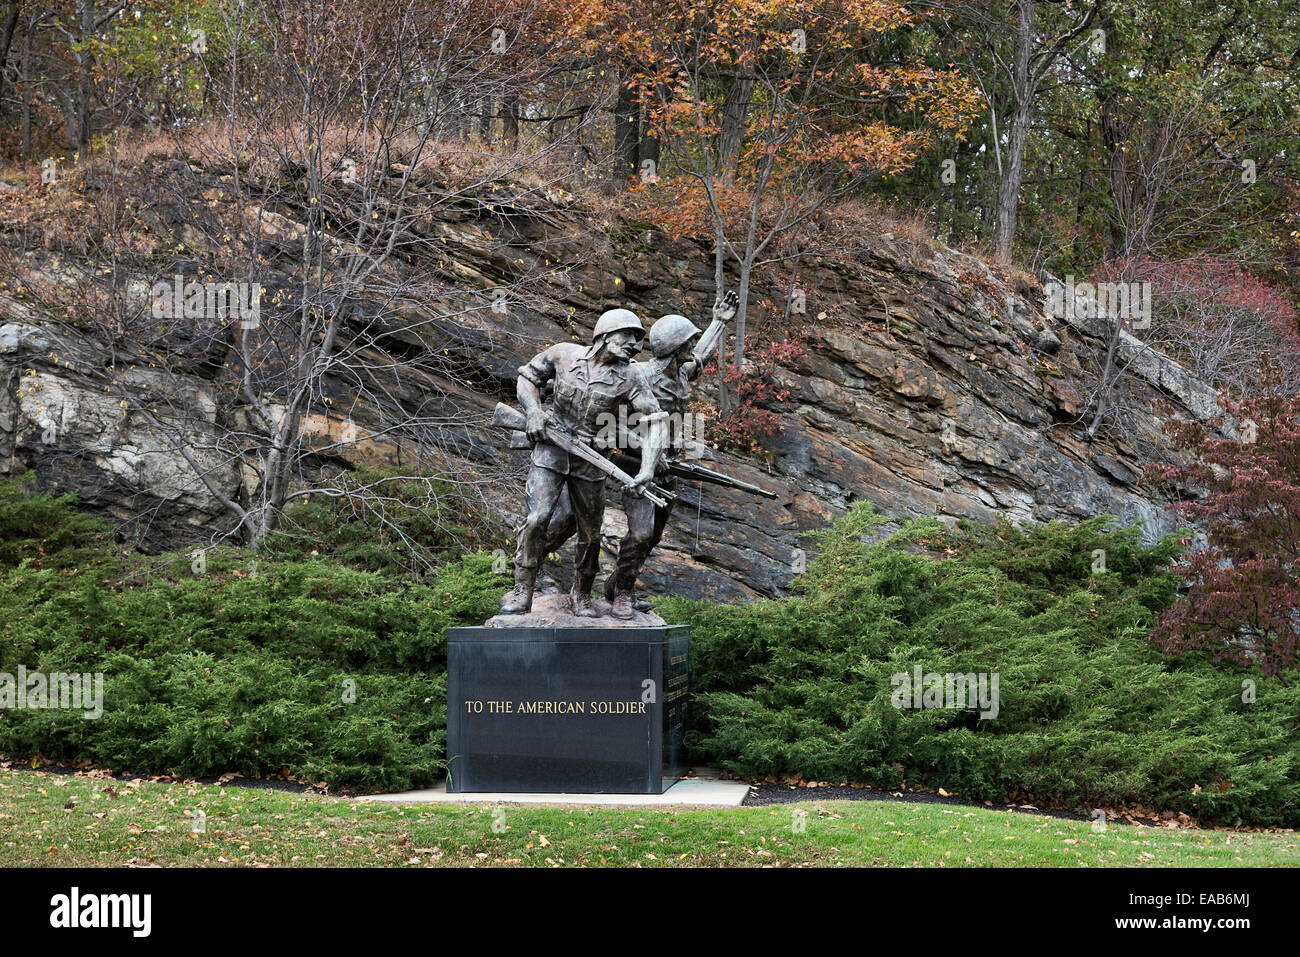 Bronze sculpture tribute to the American Soldiier, West Point Military Academy, New York, USA Stock Photo